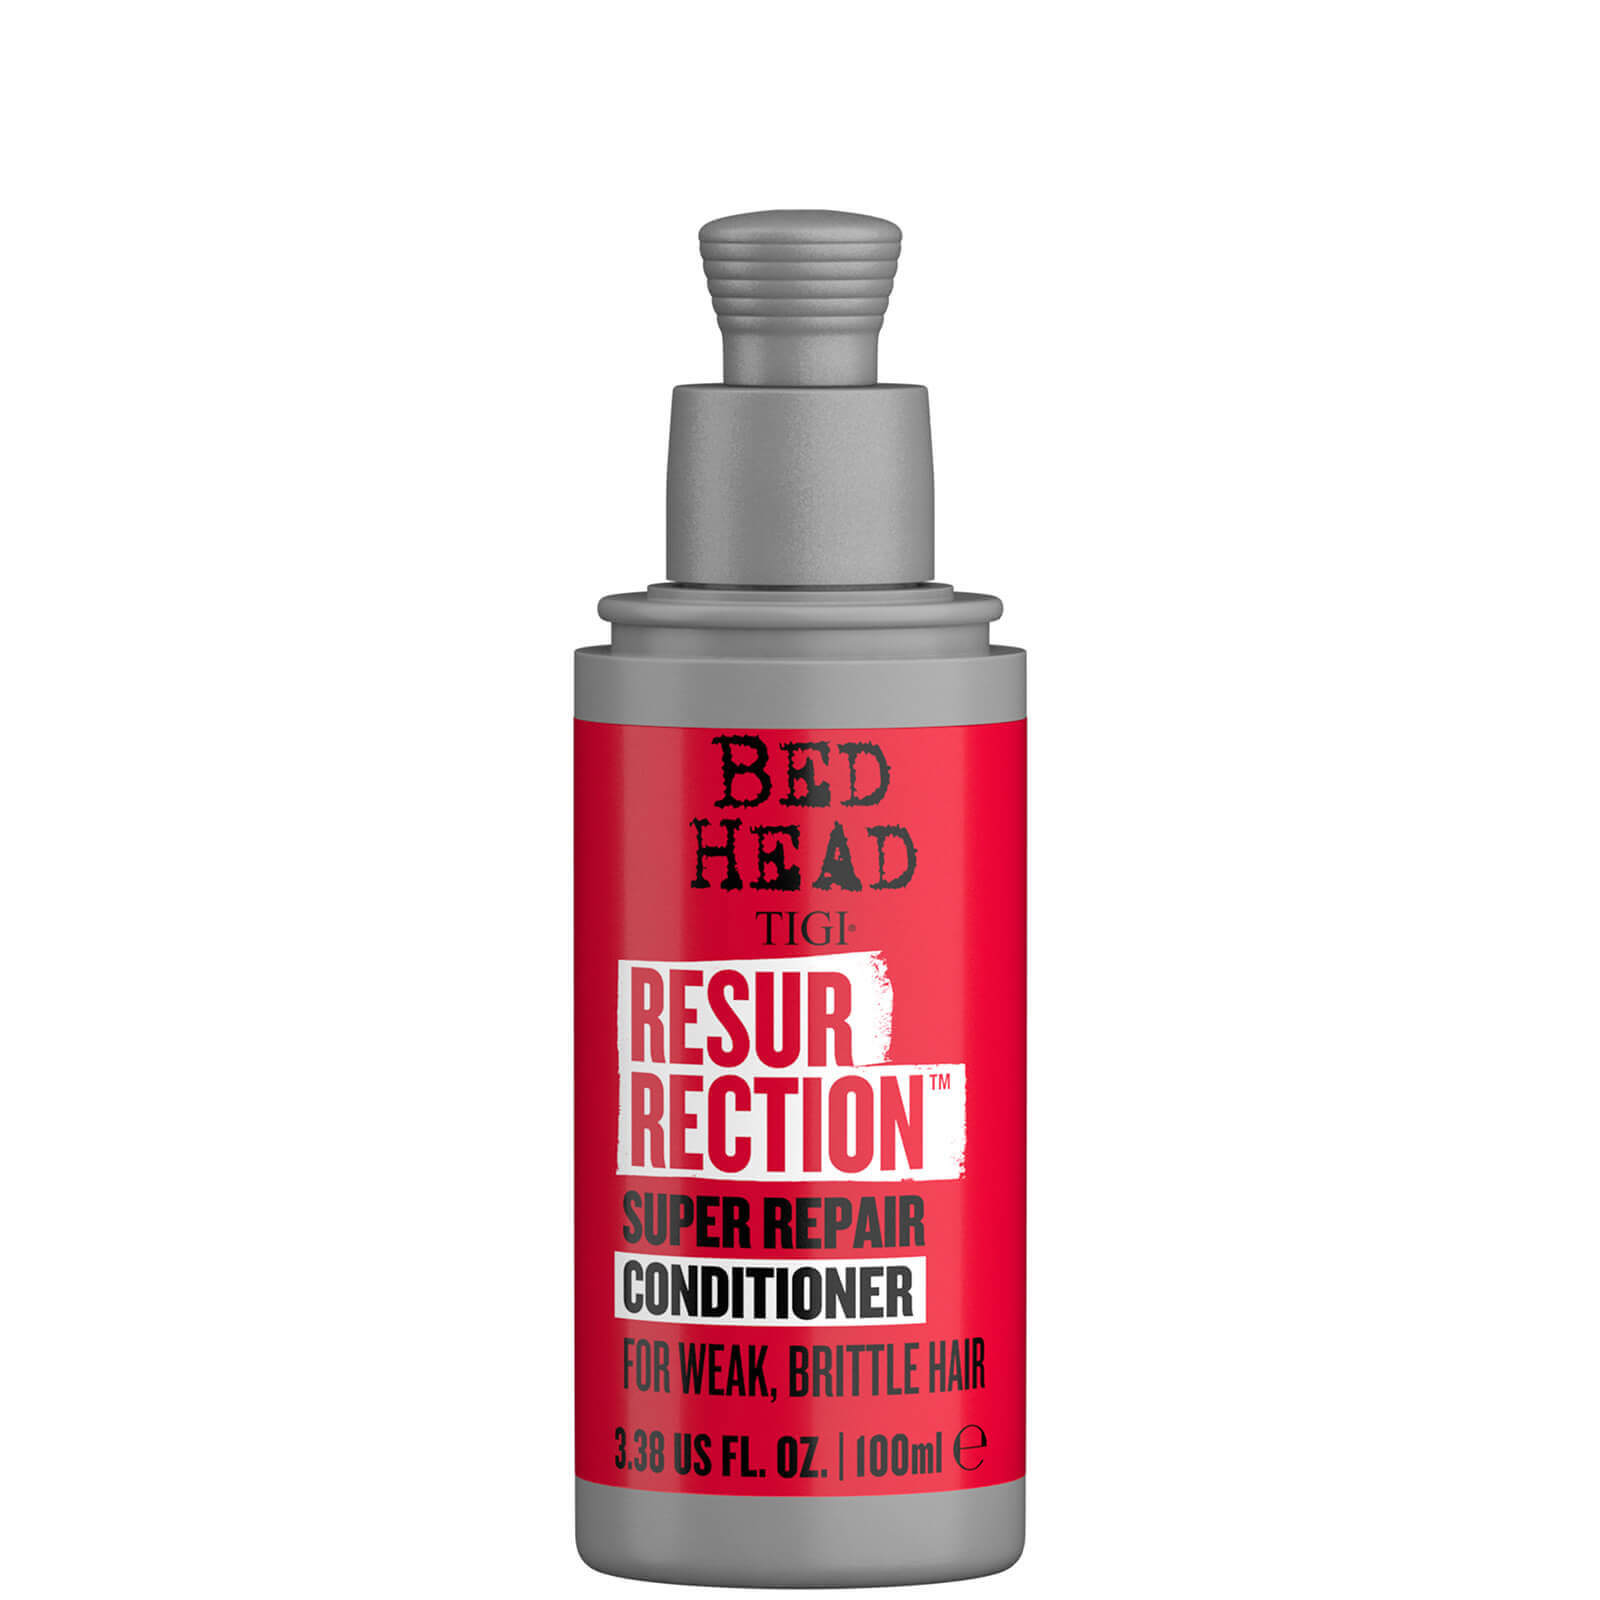 Photos - Hair Product TIGI Bed Head Resurrection Repair Conditioner for Damaged Hair Travel Size 